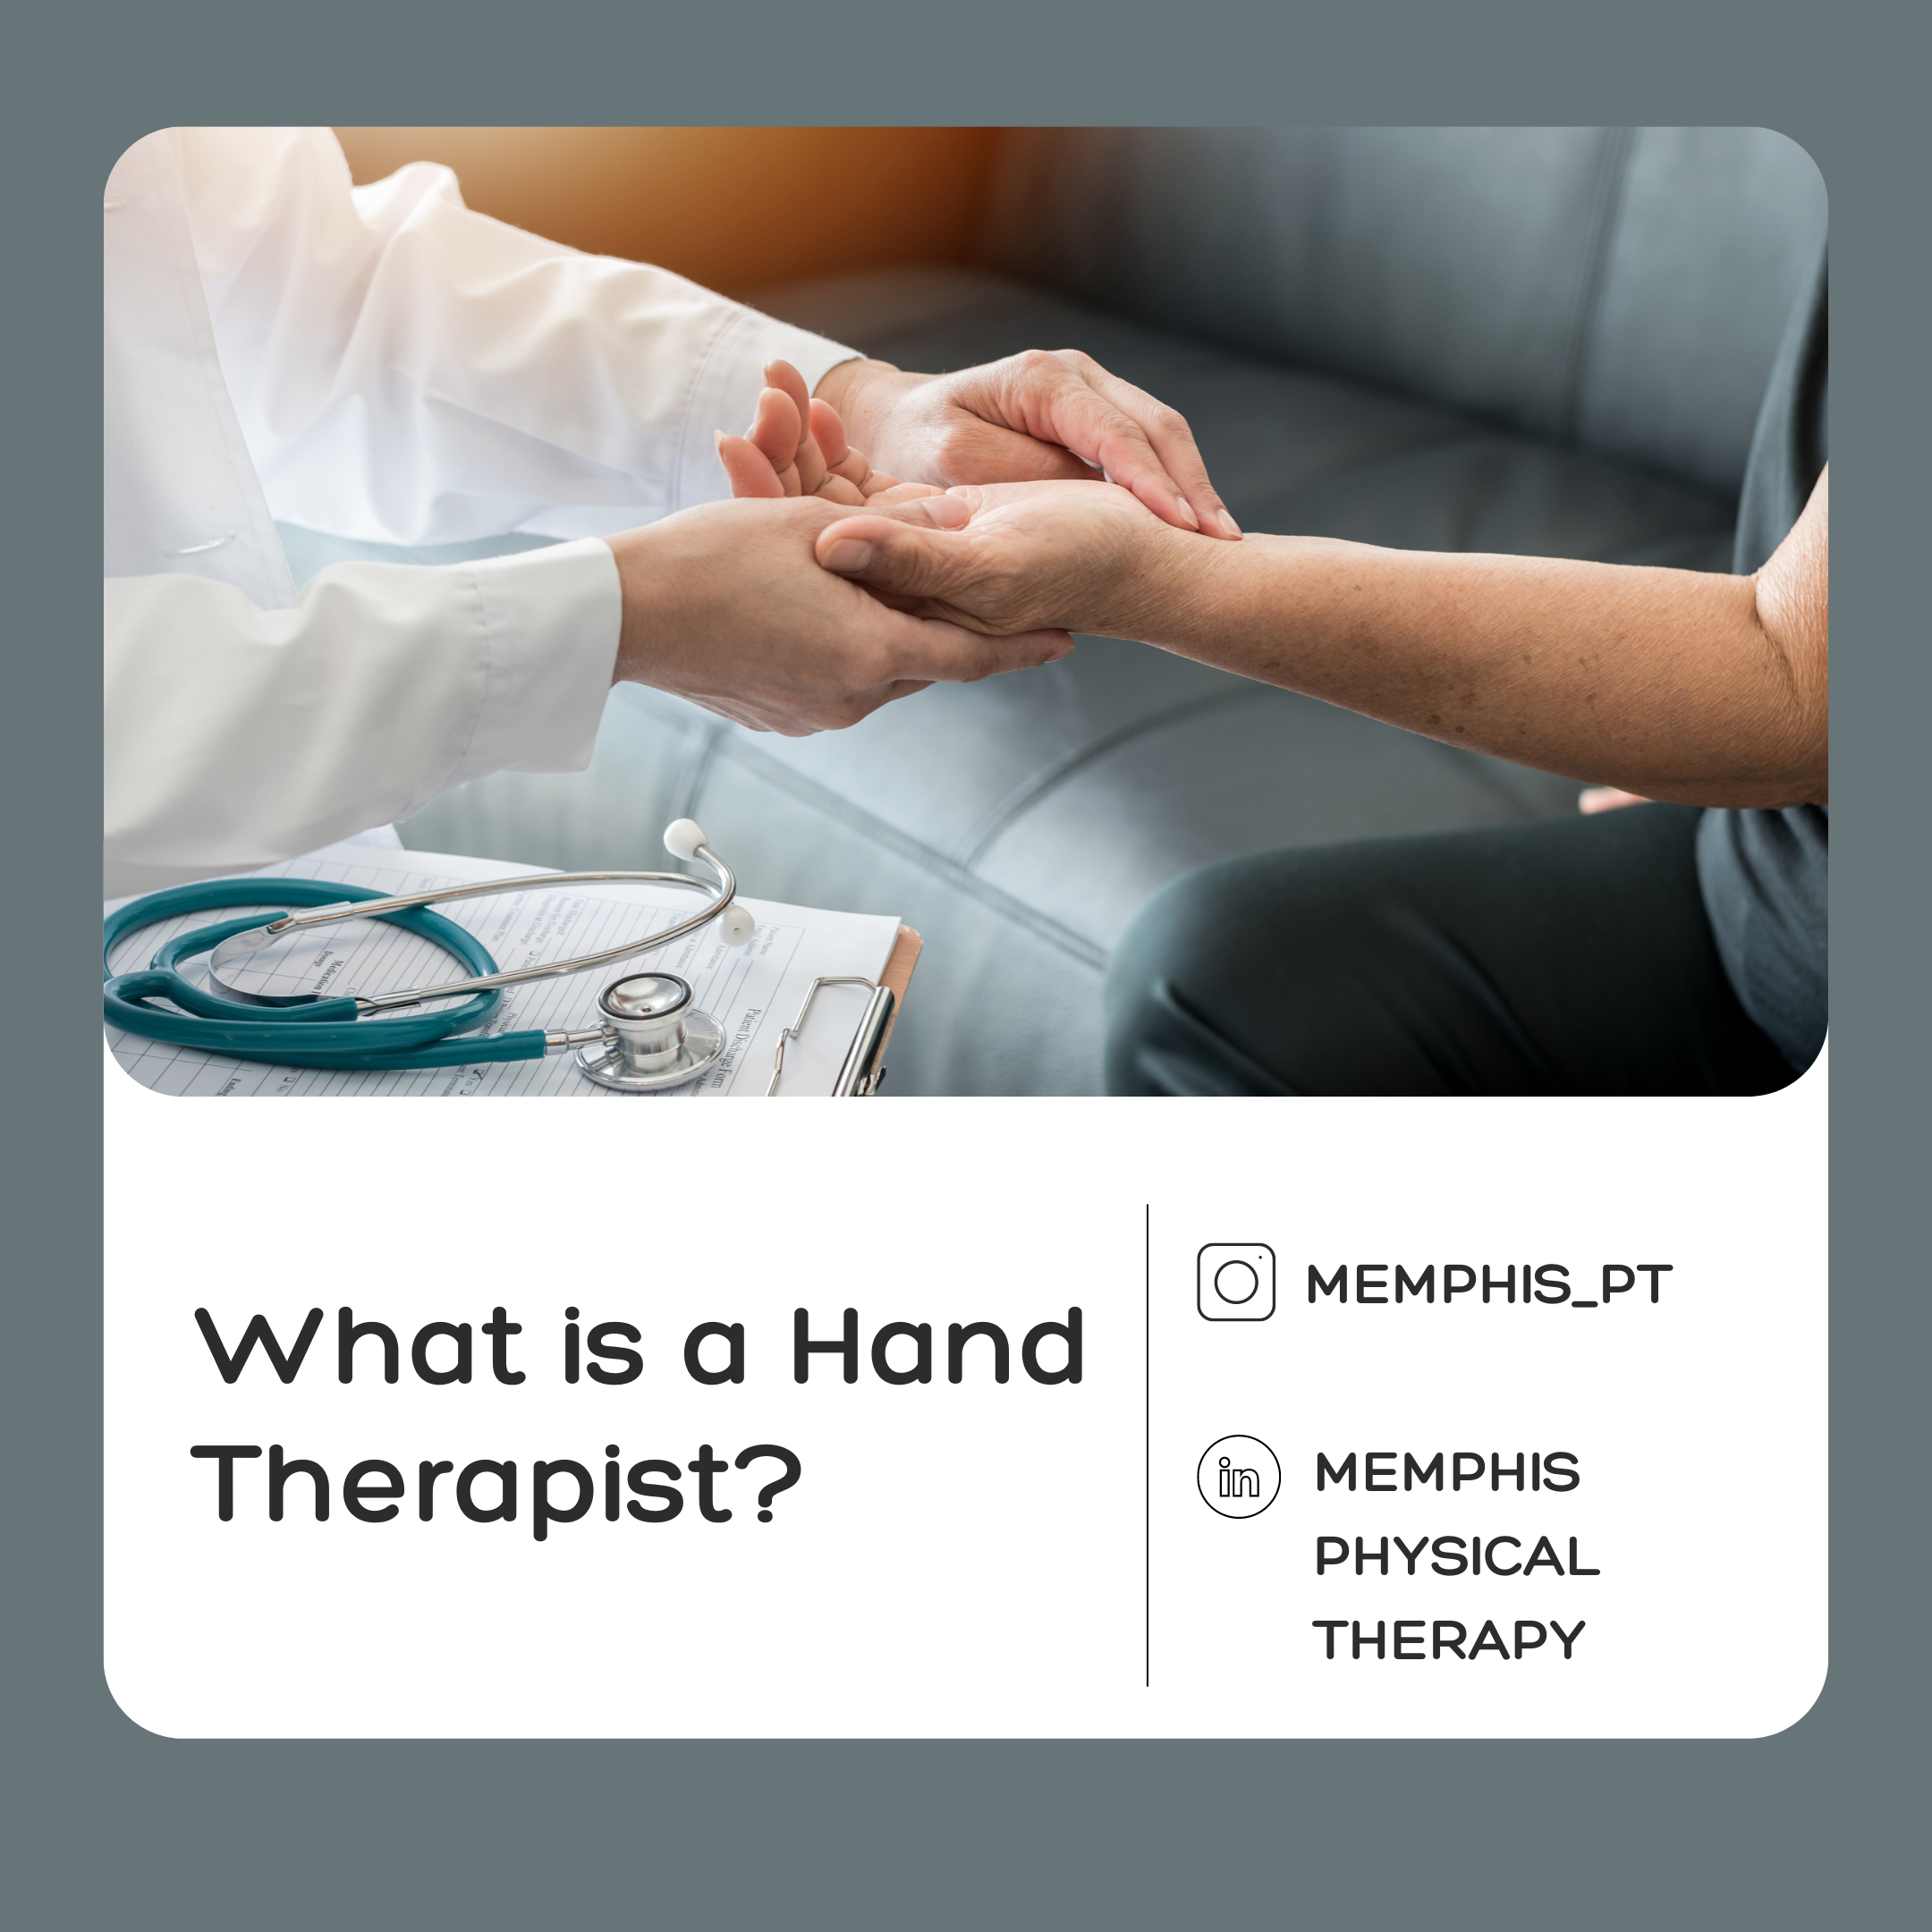 hand therapist, hand therapy, what is a hand therapist